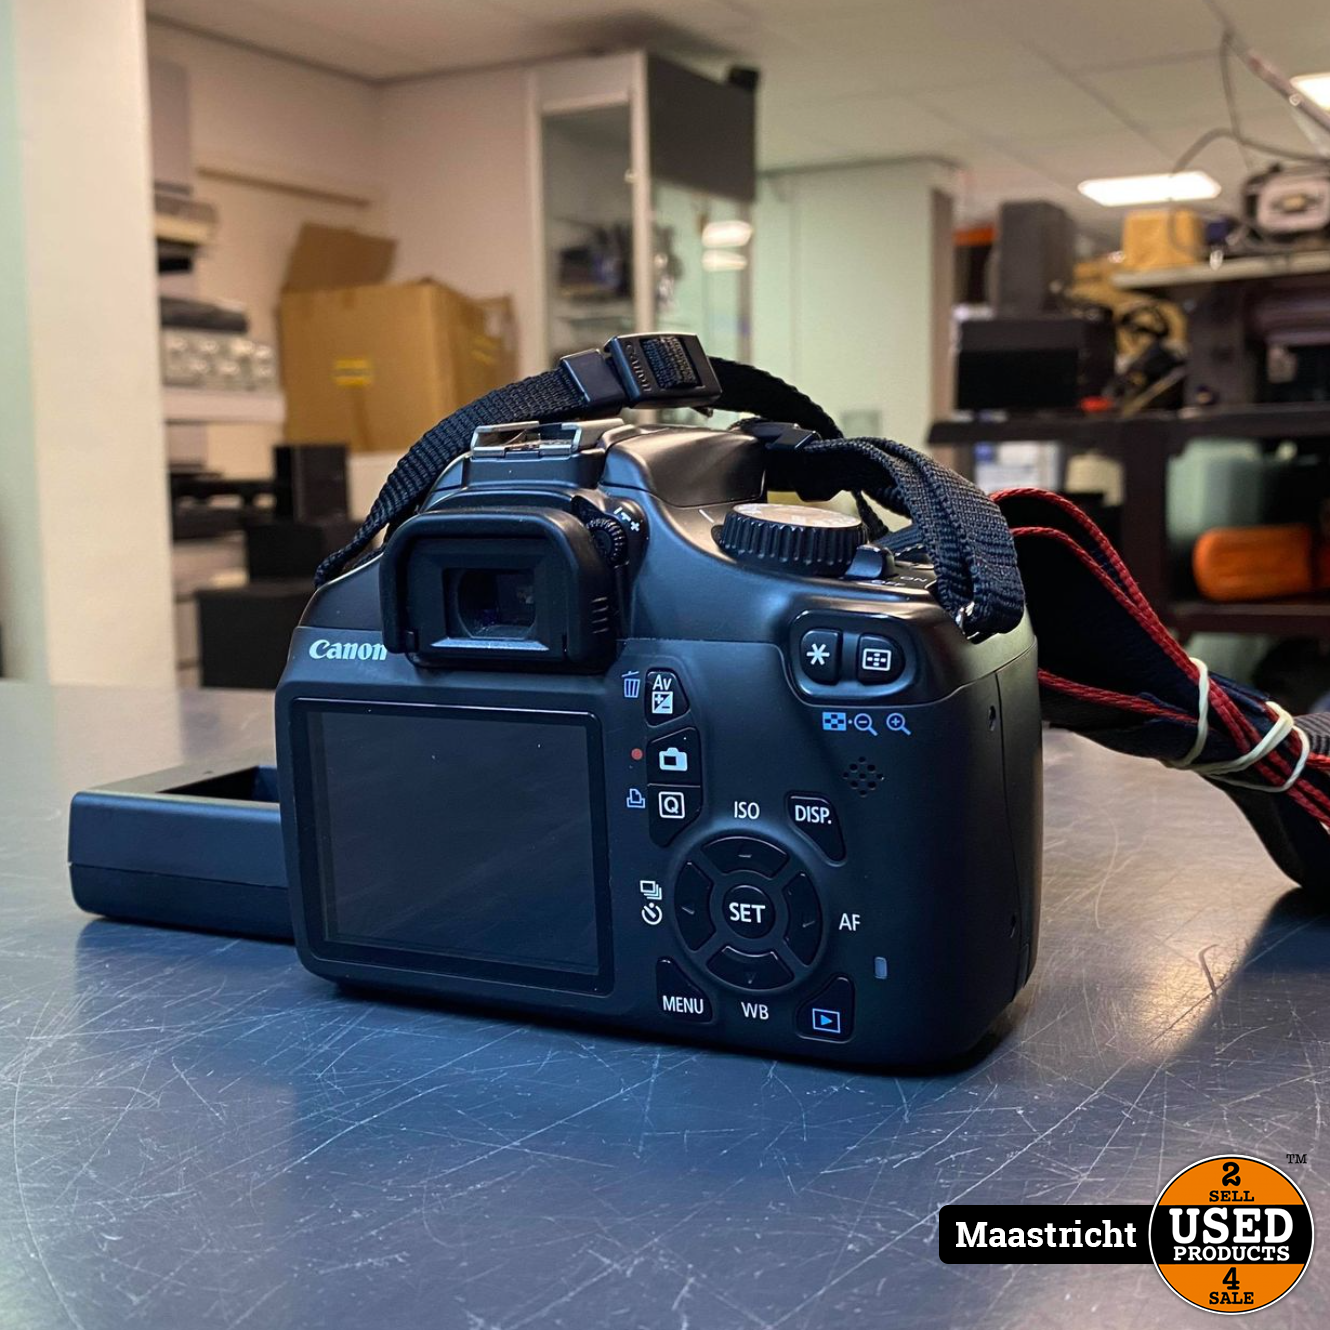 onbekend Plantkunde motto Canon EOS 1100D with EFS 18-55 lens - Used Products Maasstricht